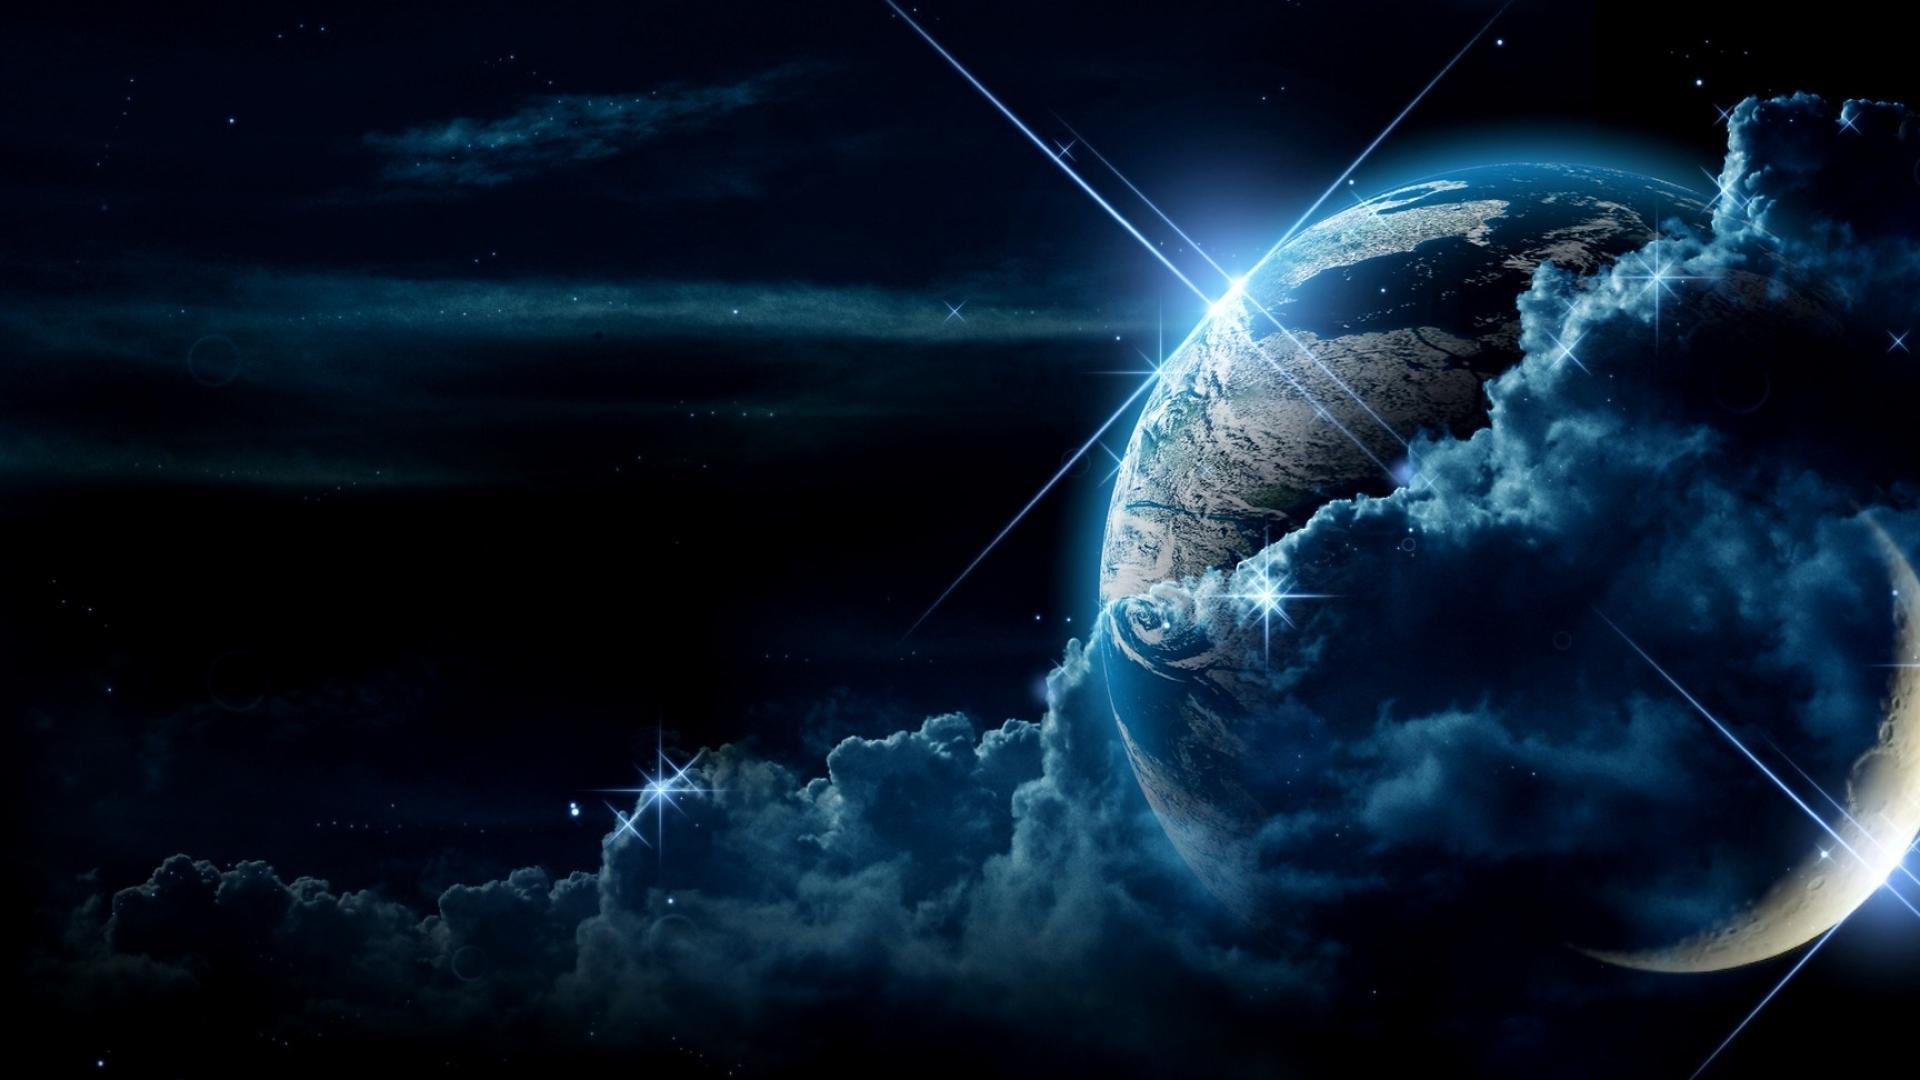 Earth From Space Wallpaper Cool HD 1080P 12 HD Wallpaper. Hdwaly